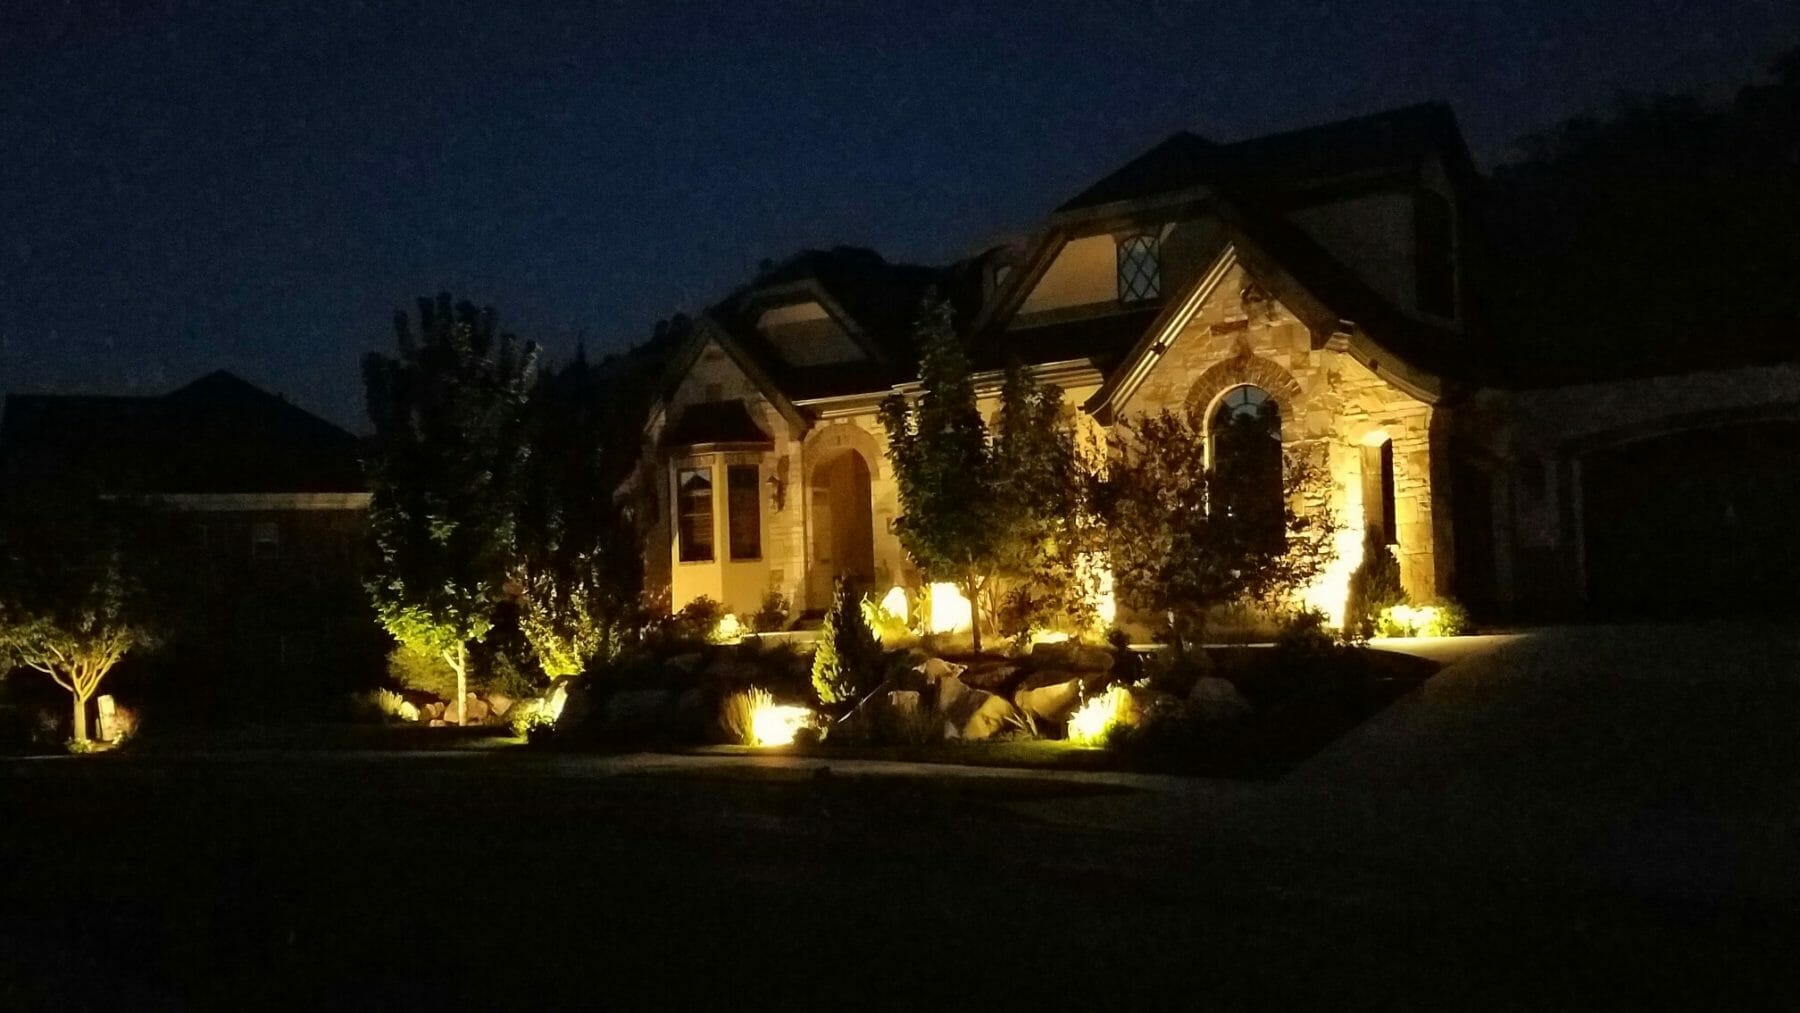 Lights on exterior of home